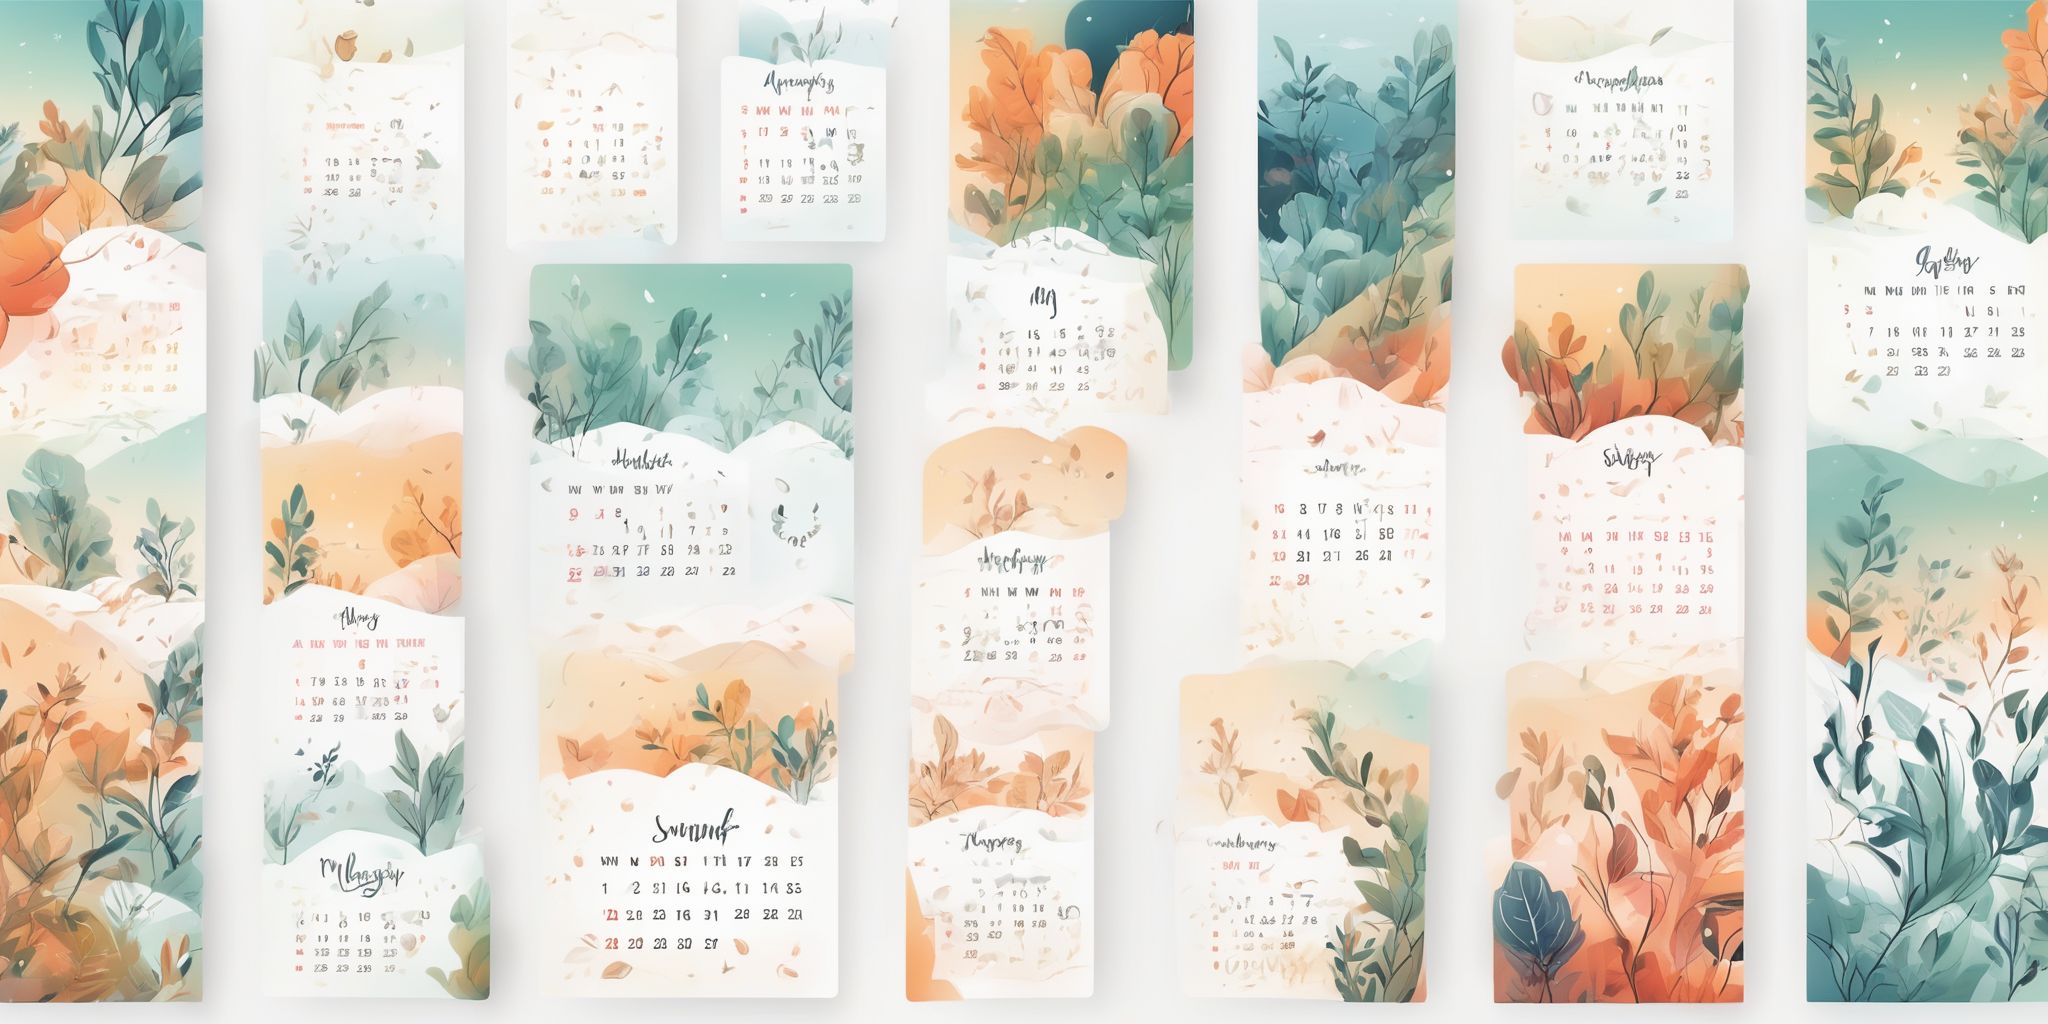 calendar in illustration style with gradients and white background